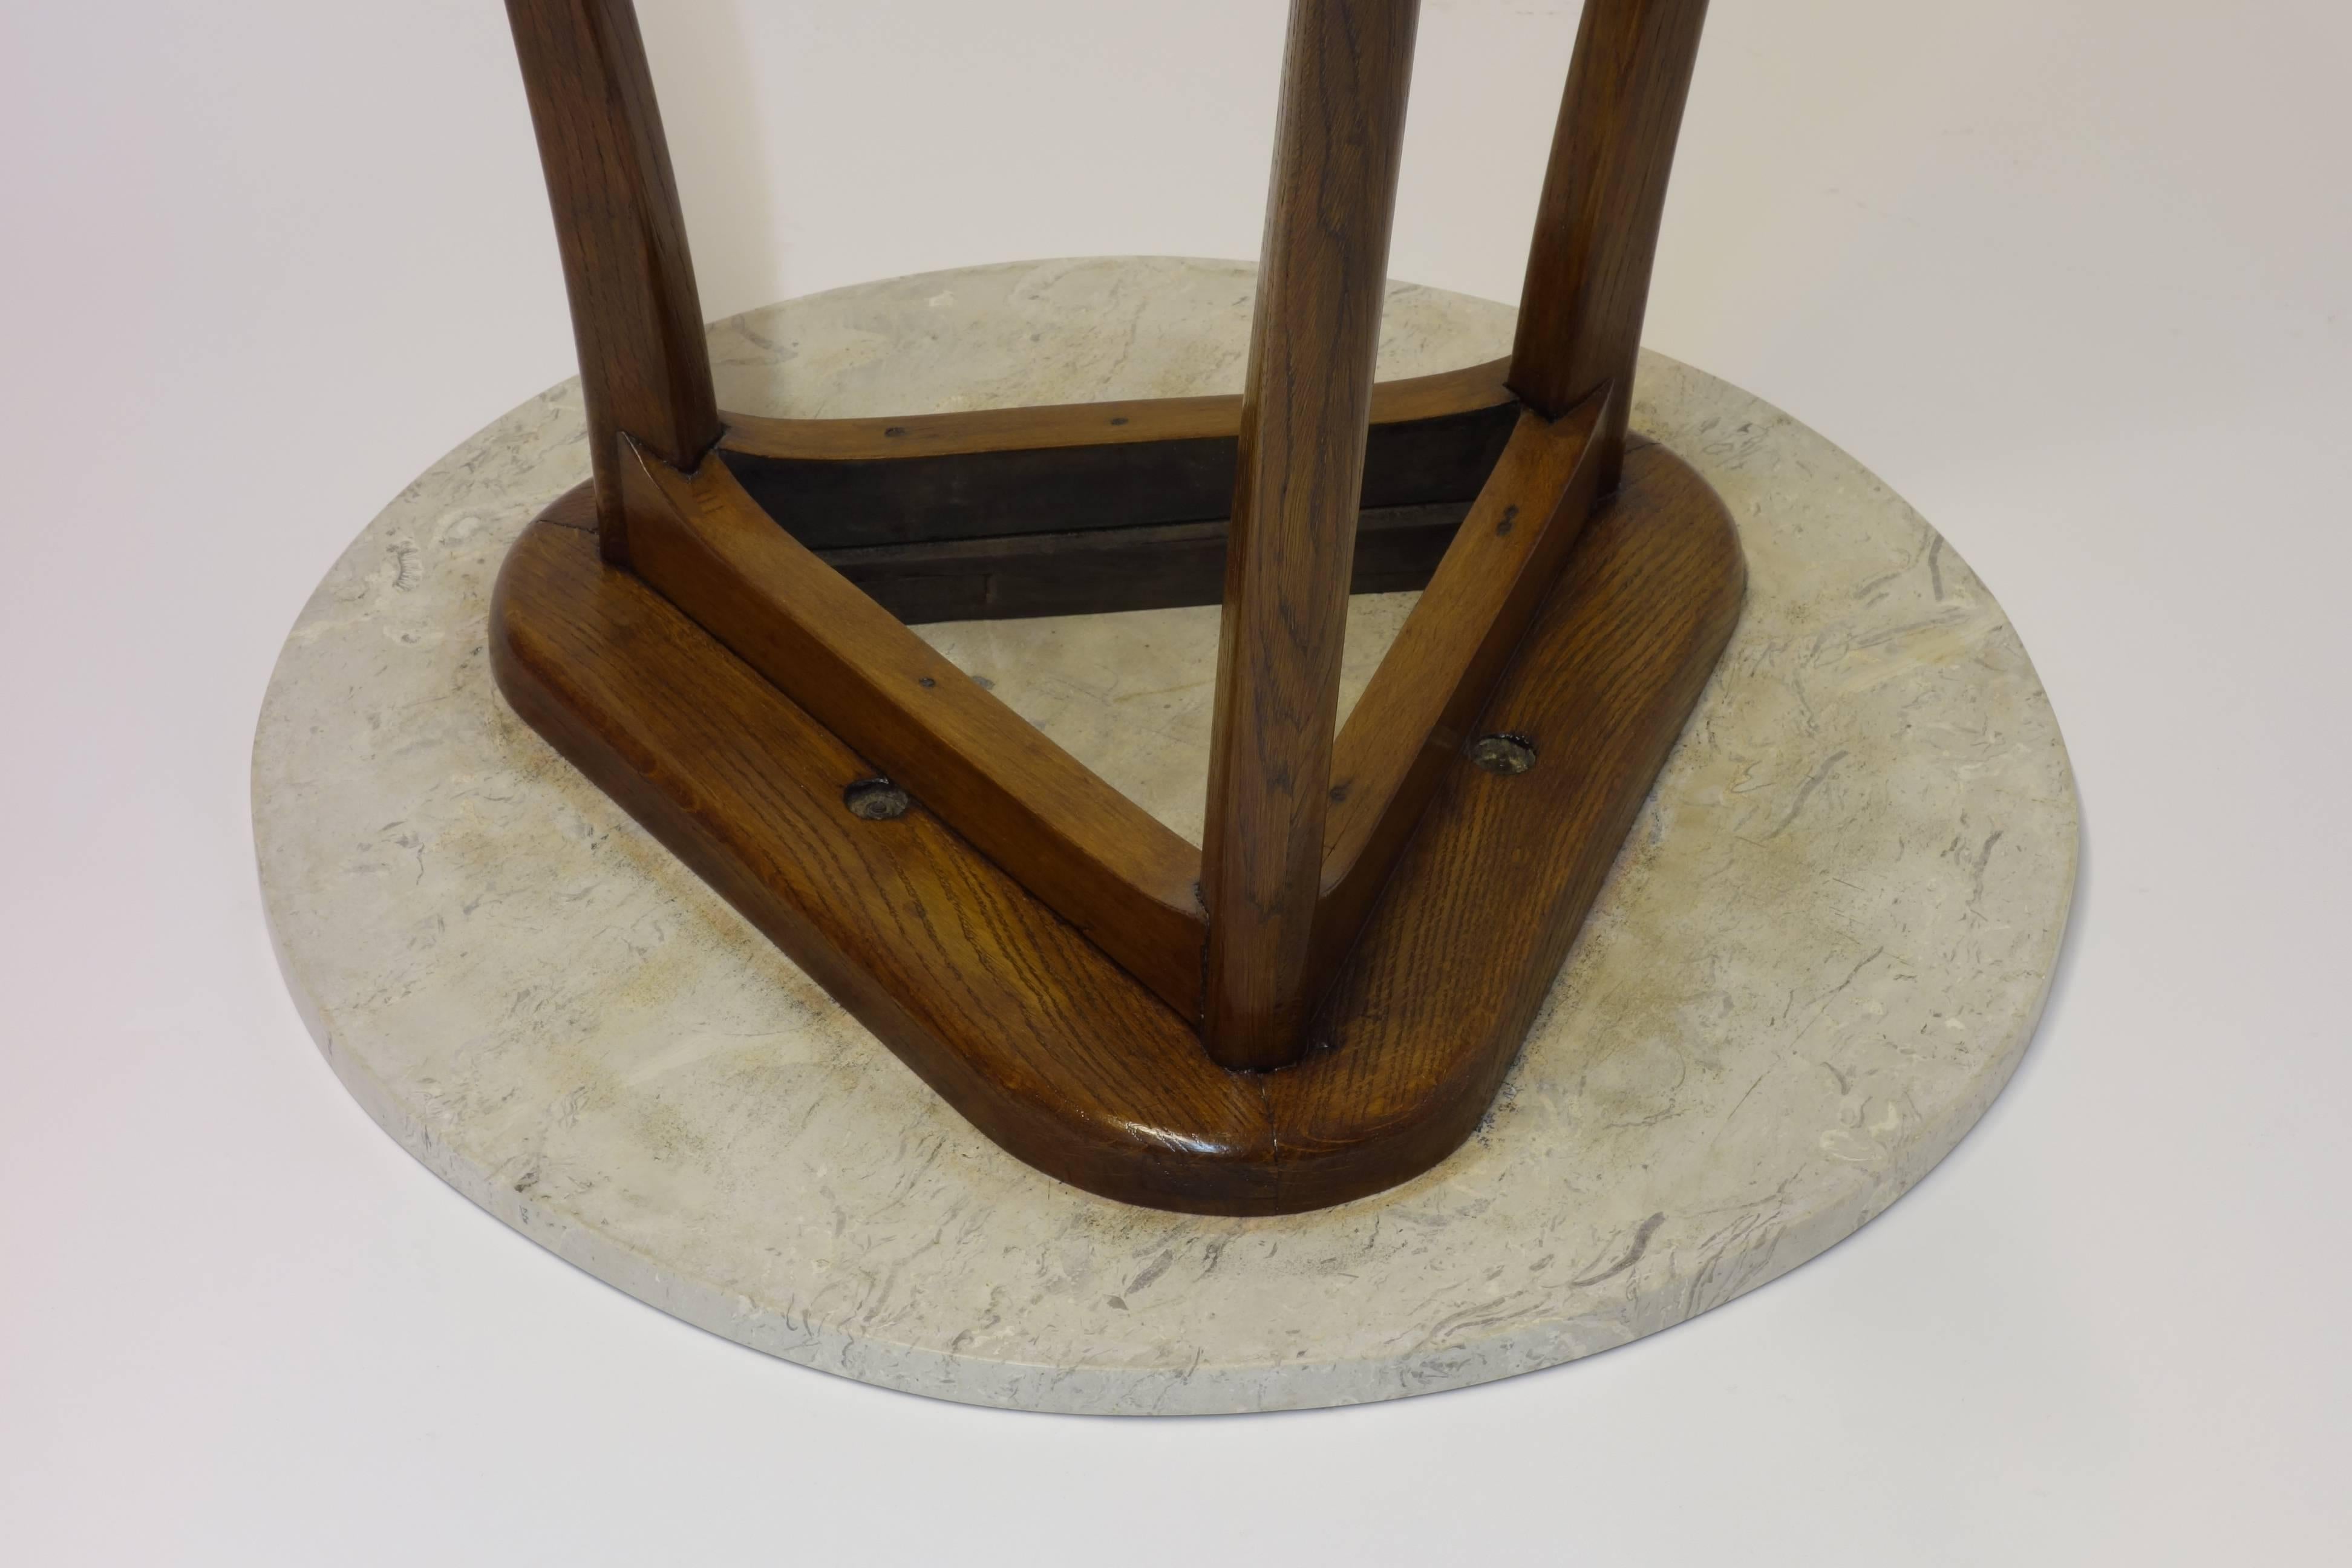 Rare side table attributed to Josef Frank, with a basis framework made of oak and solid circular stone tabletop. An early and unusual piece.